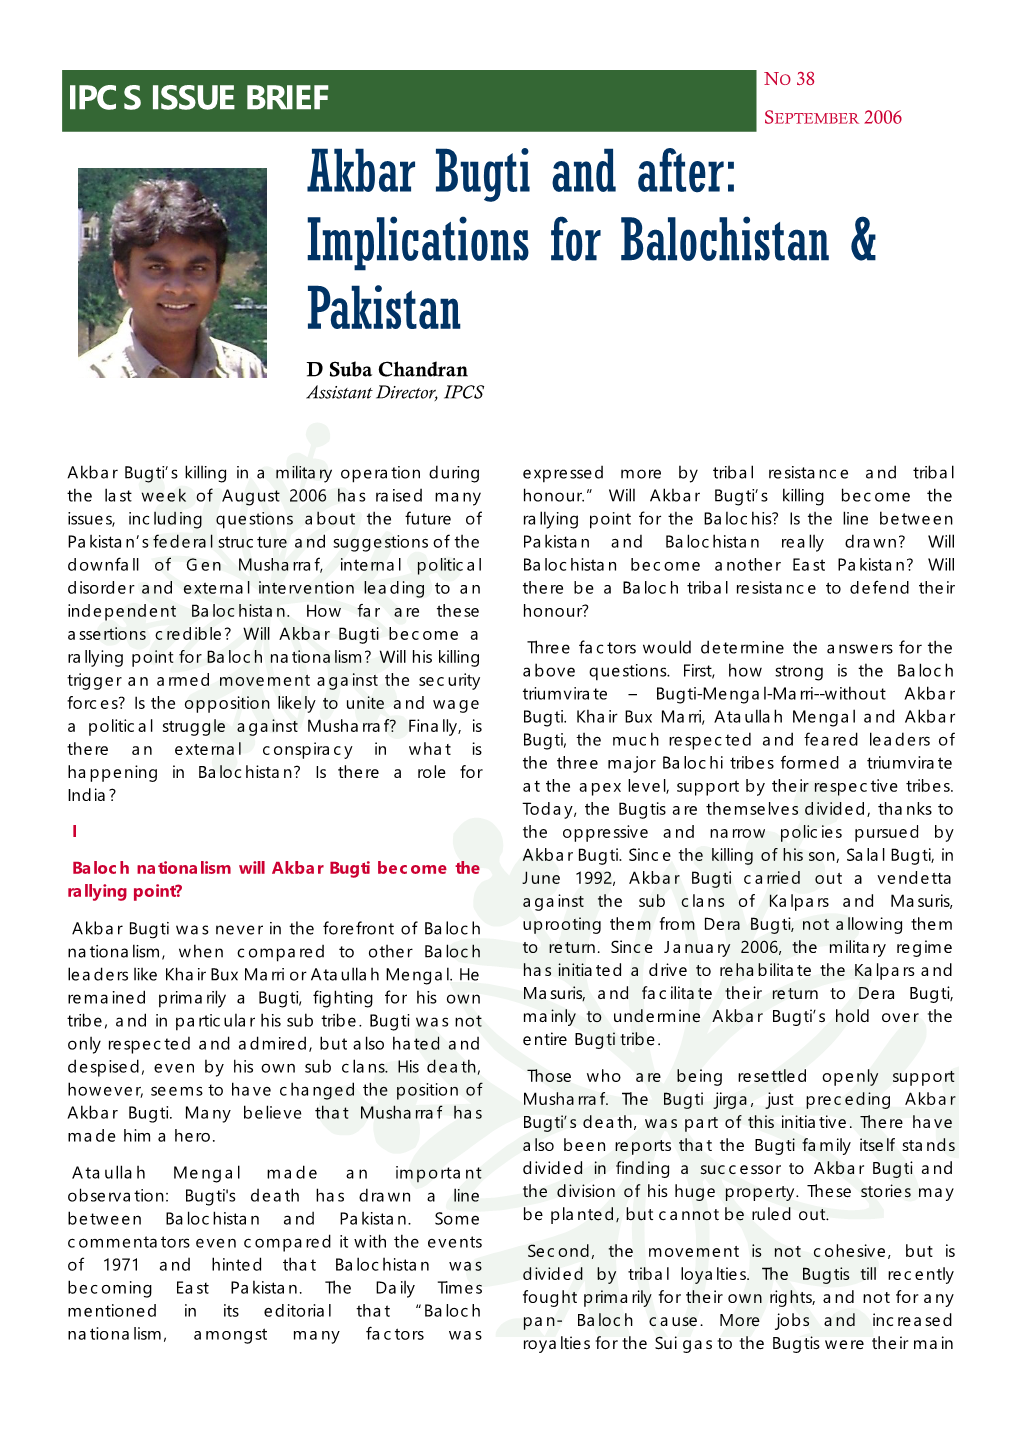 Akbar Bugti and After: Implications for Balochistan & Pakistan